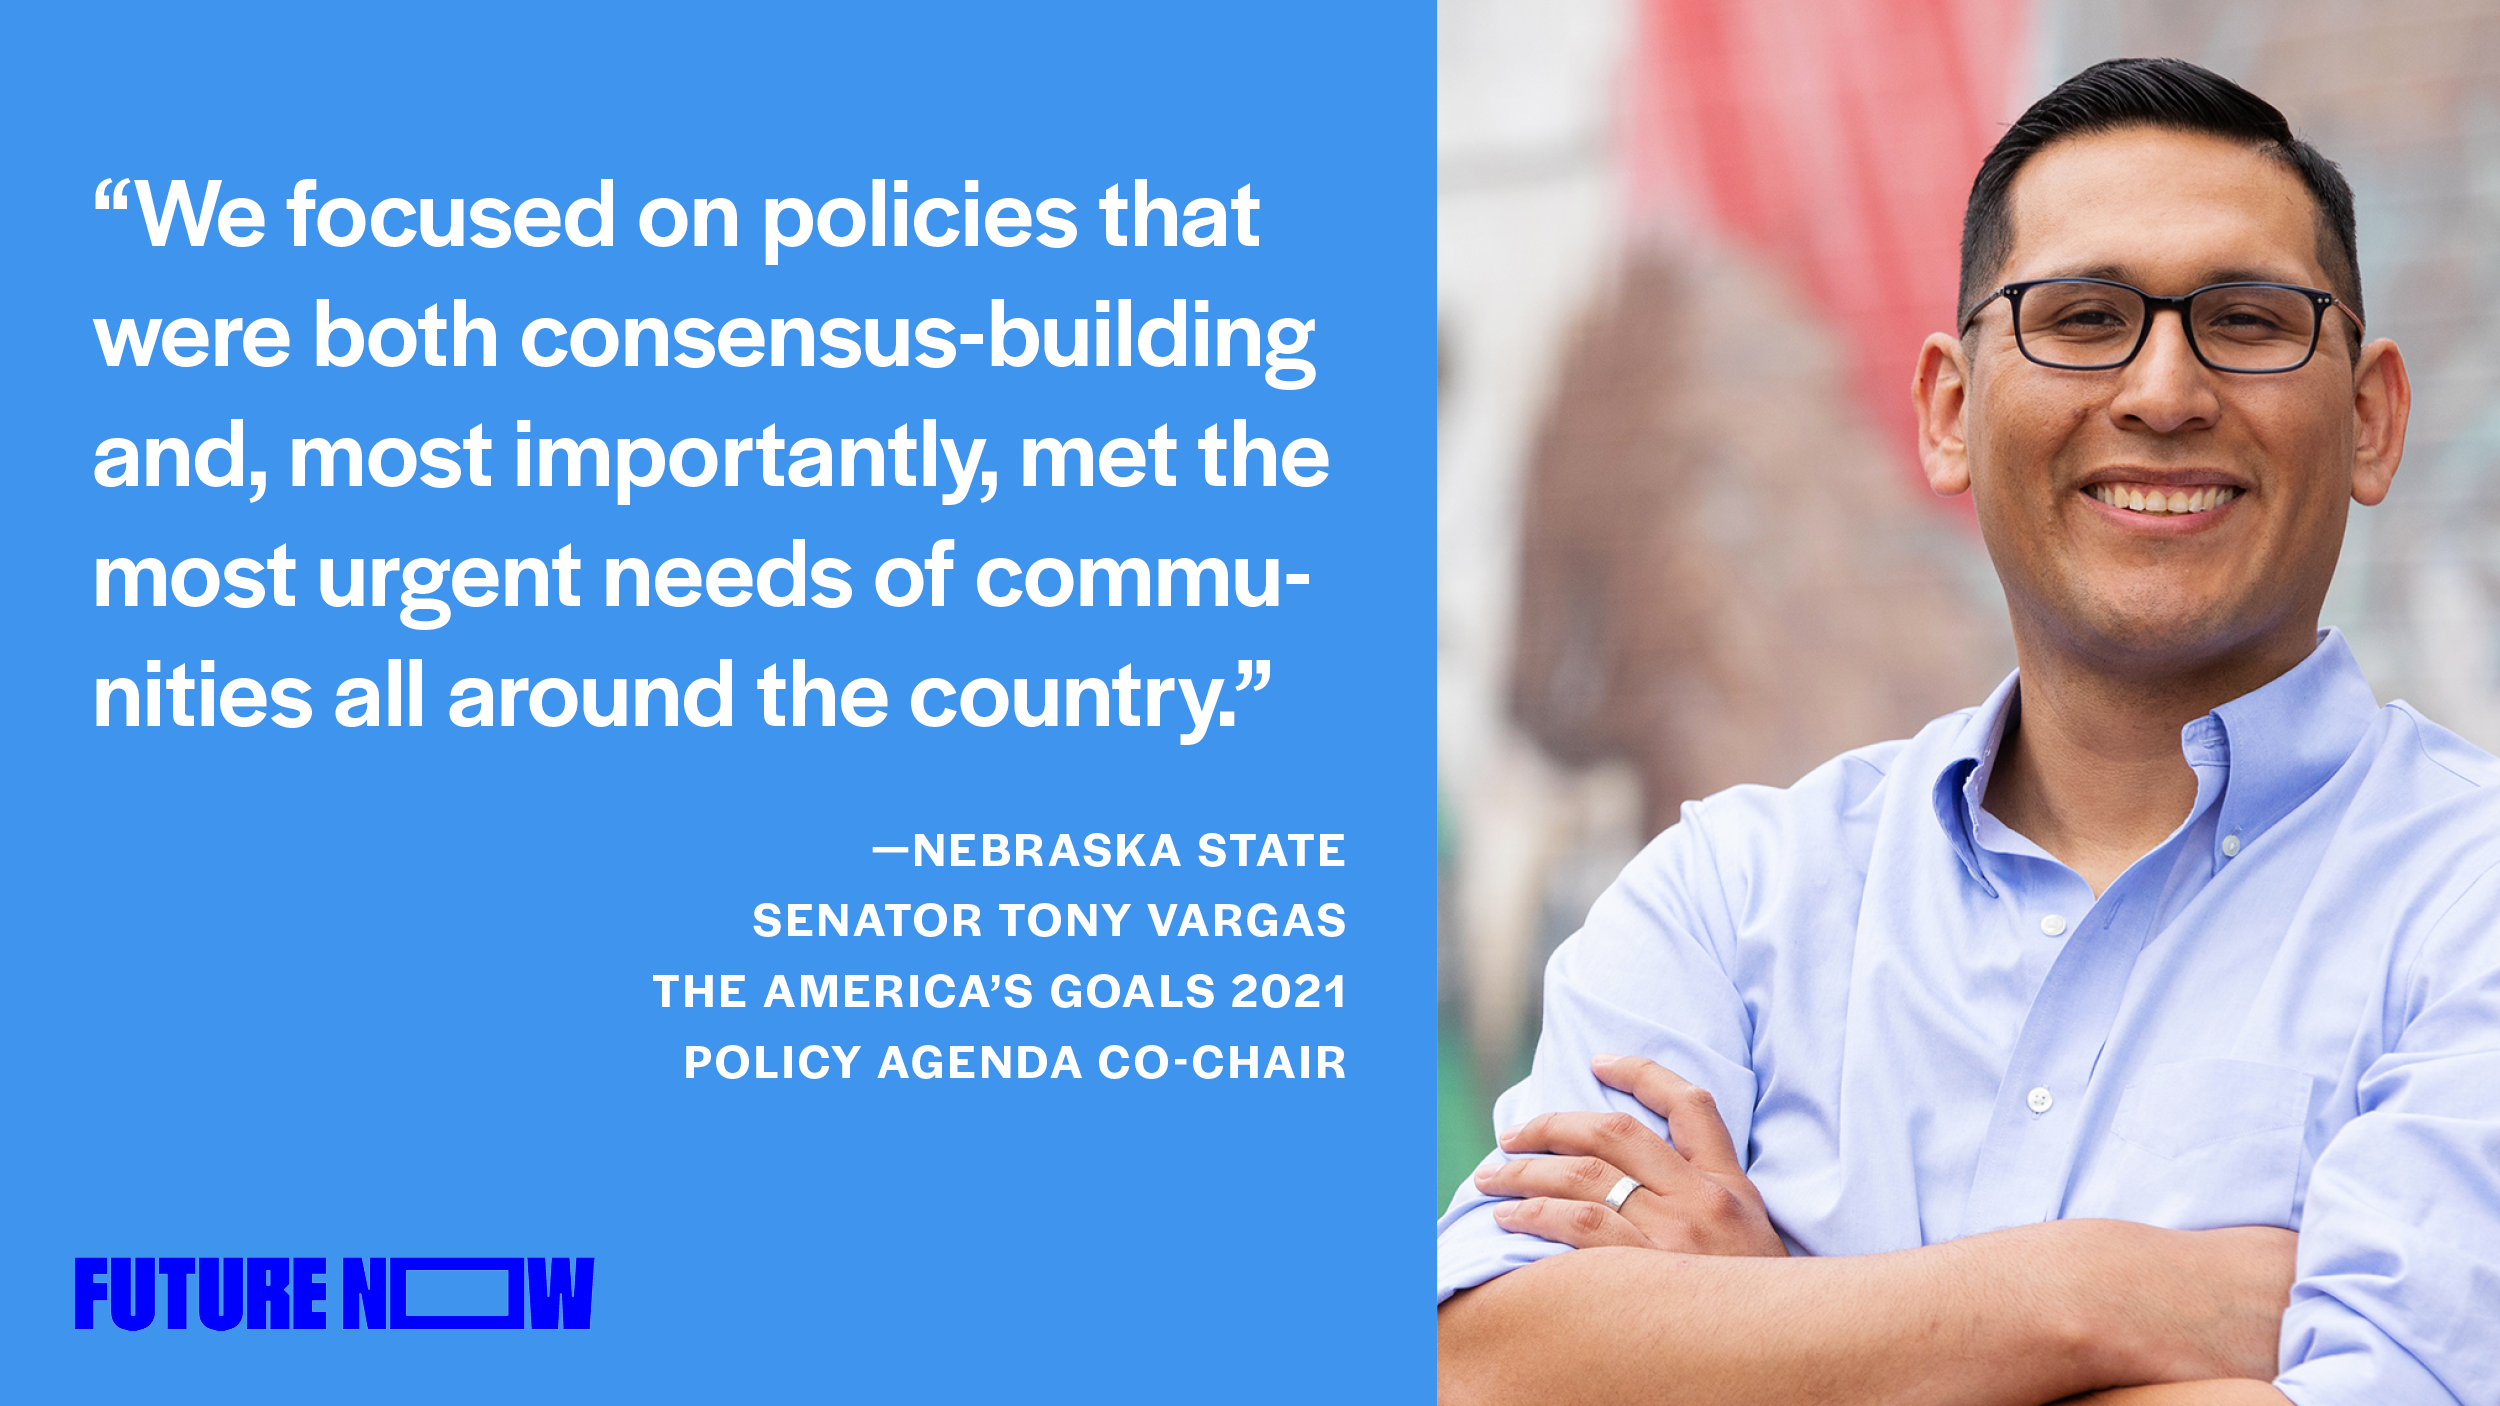 Photo of Nebraska State Senator Tony Vargas; "We focused on policies that were both consensus-building and, most importantly, met the most urgent needs of communities all around the country."